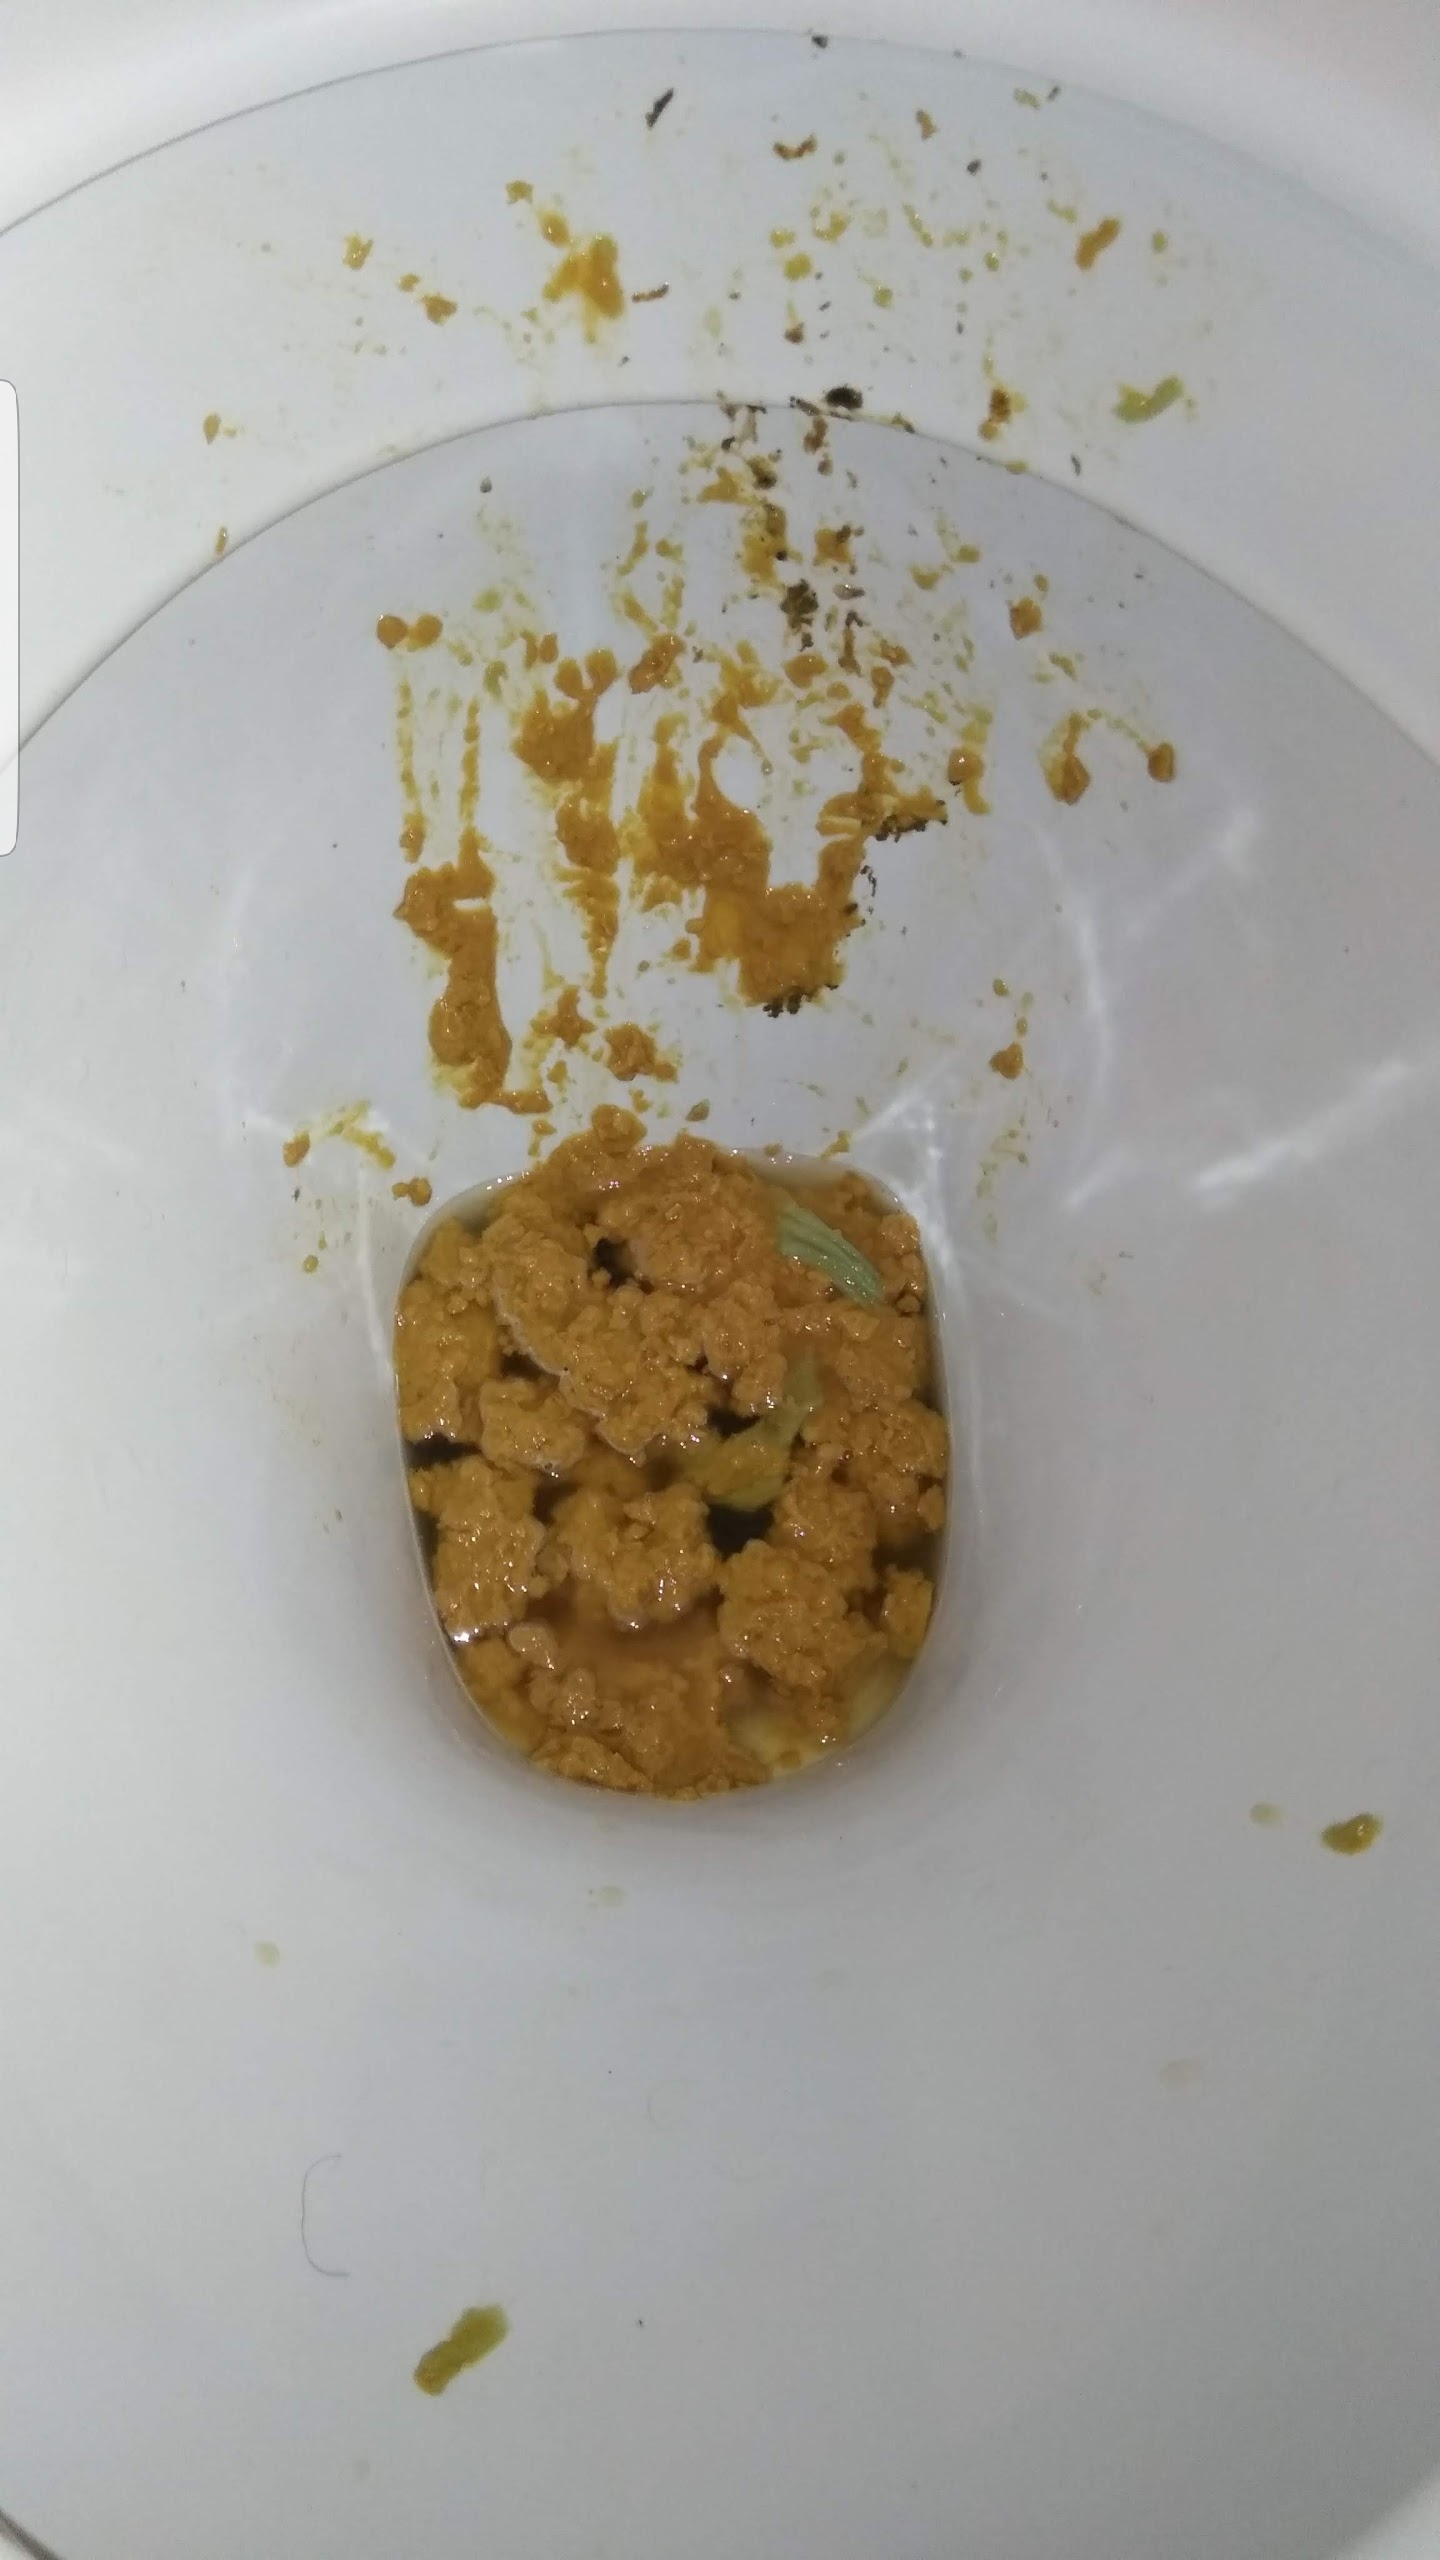 Sloppy wet farty morning shit on connors loo